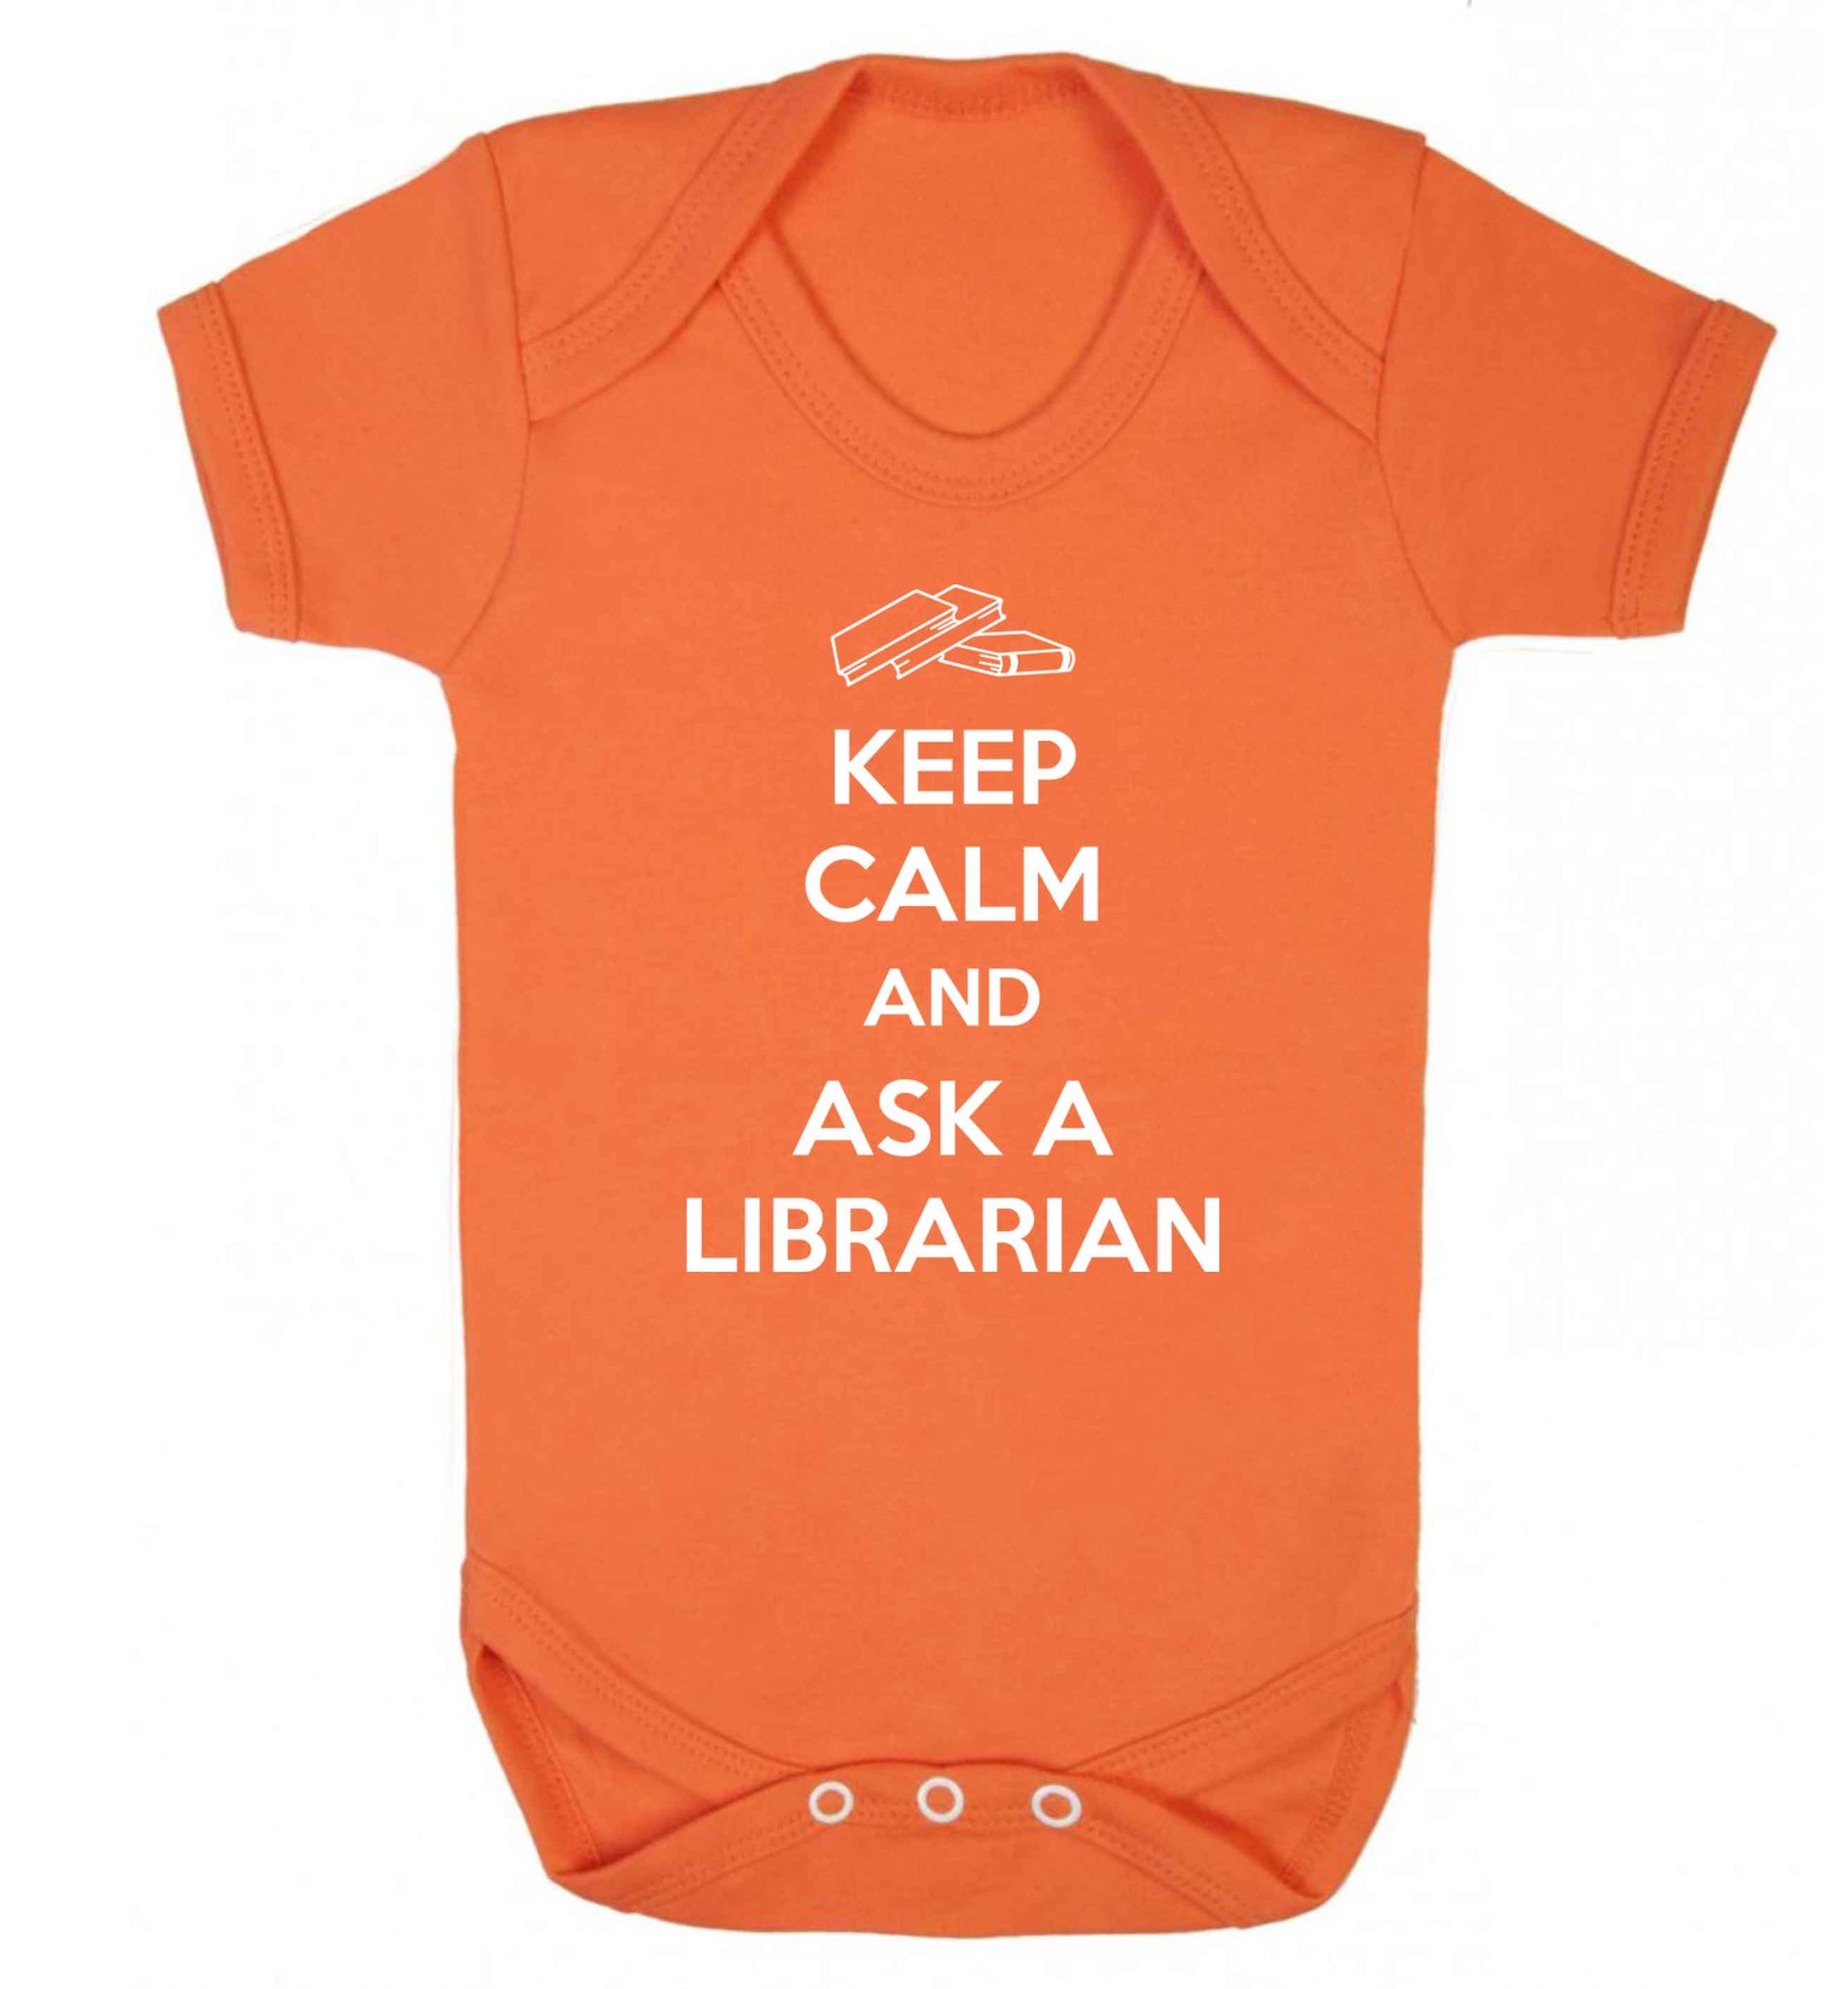 Keep calm and ask a librarian Baby Vest orange 18-24 months